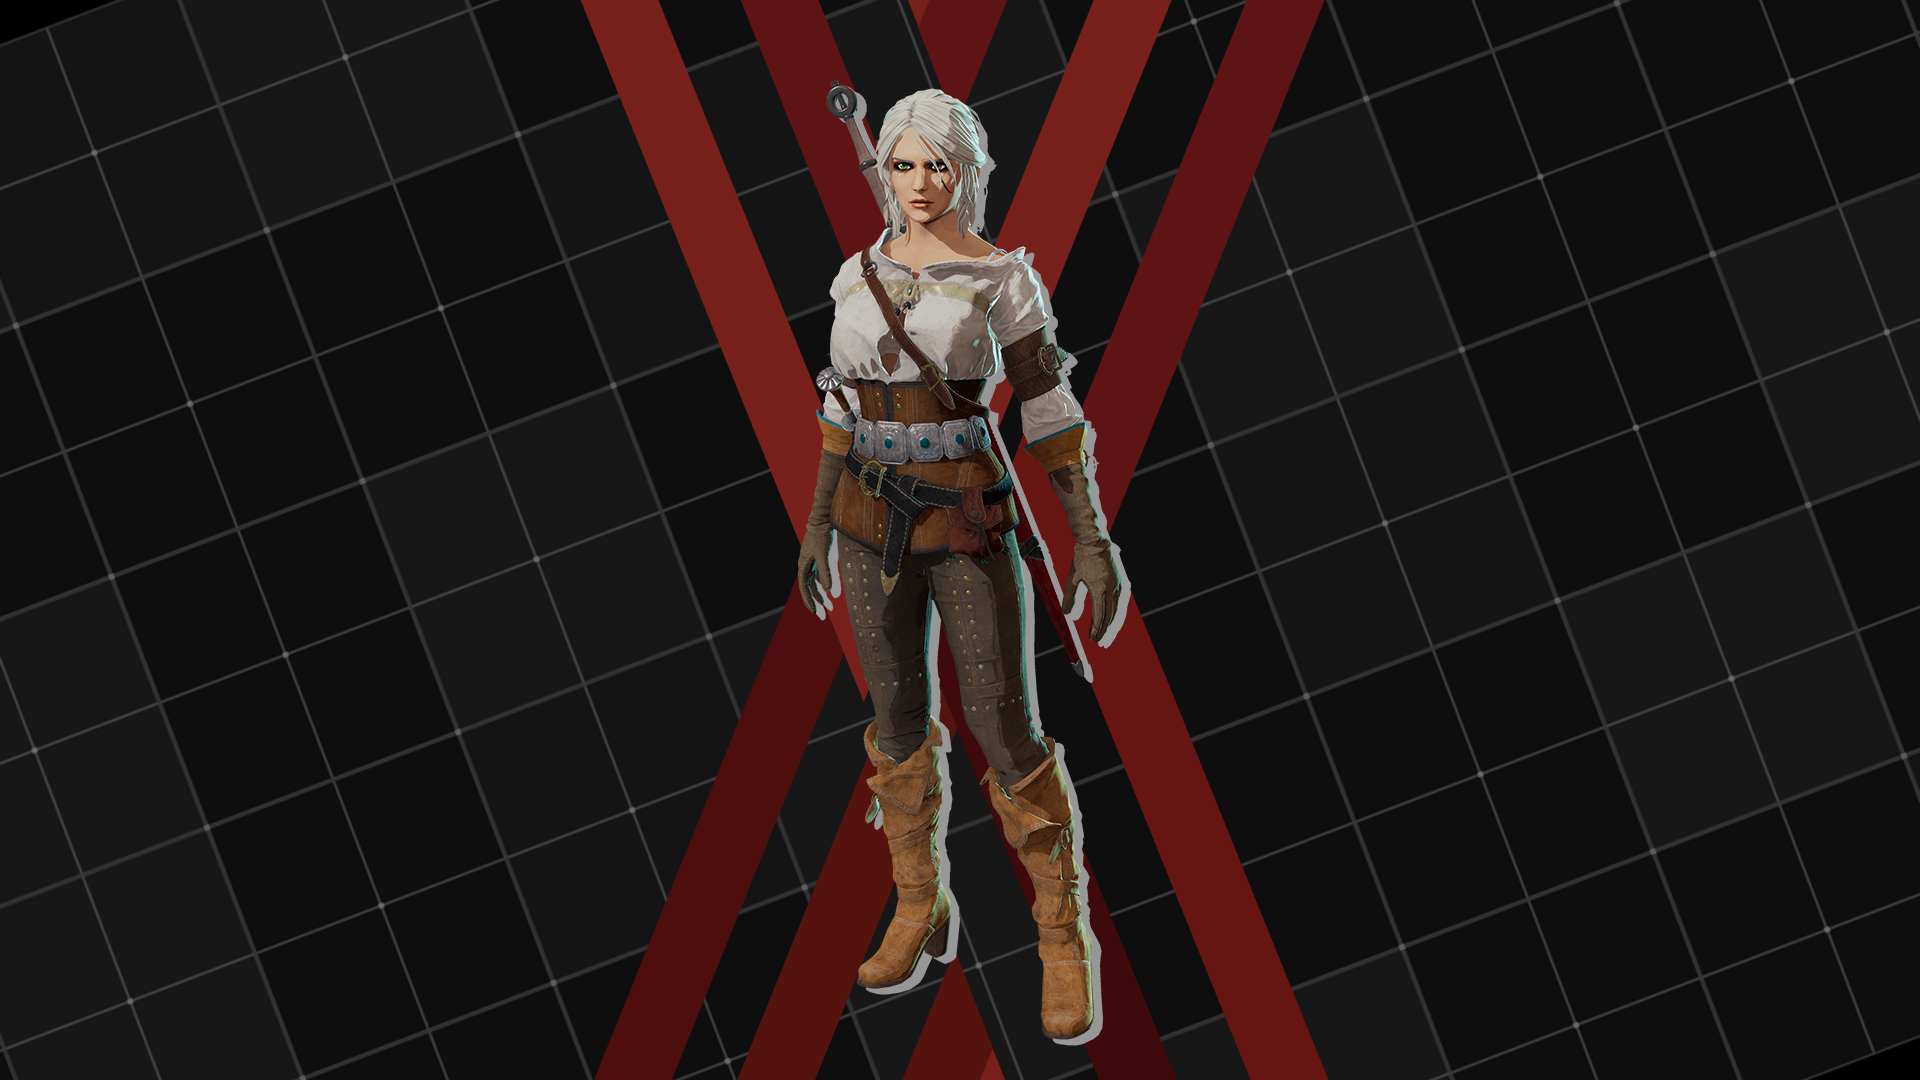 Outer Suit "Ciri's Outfit"